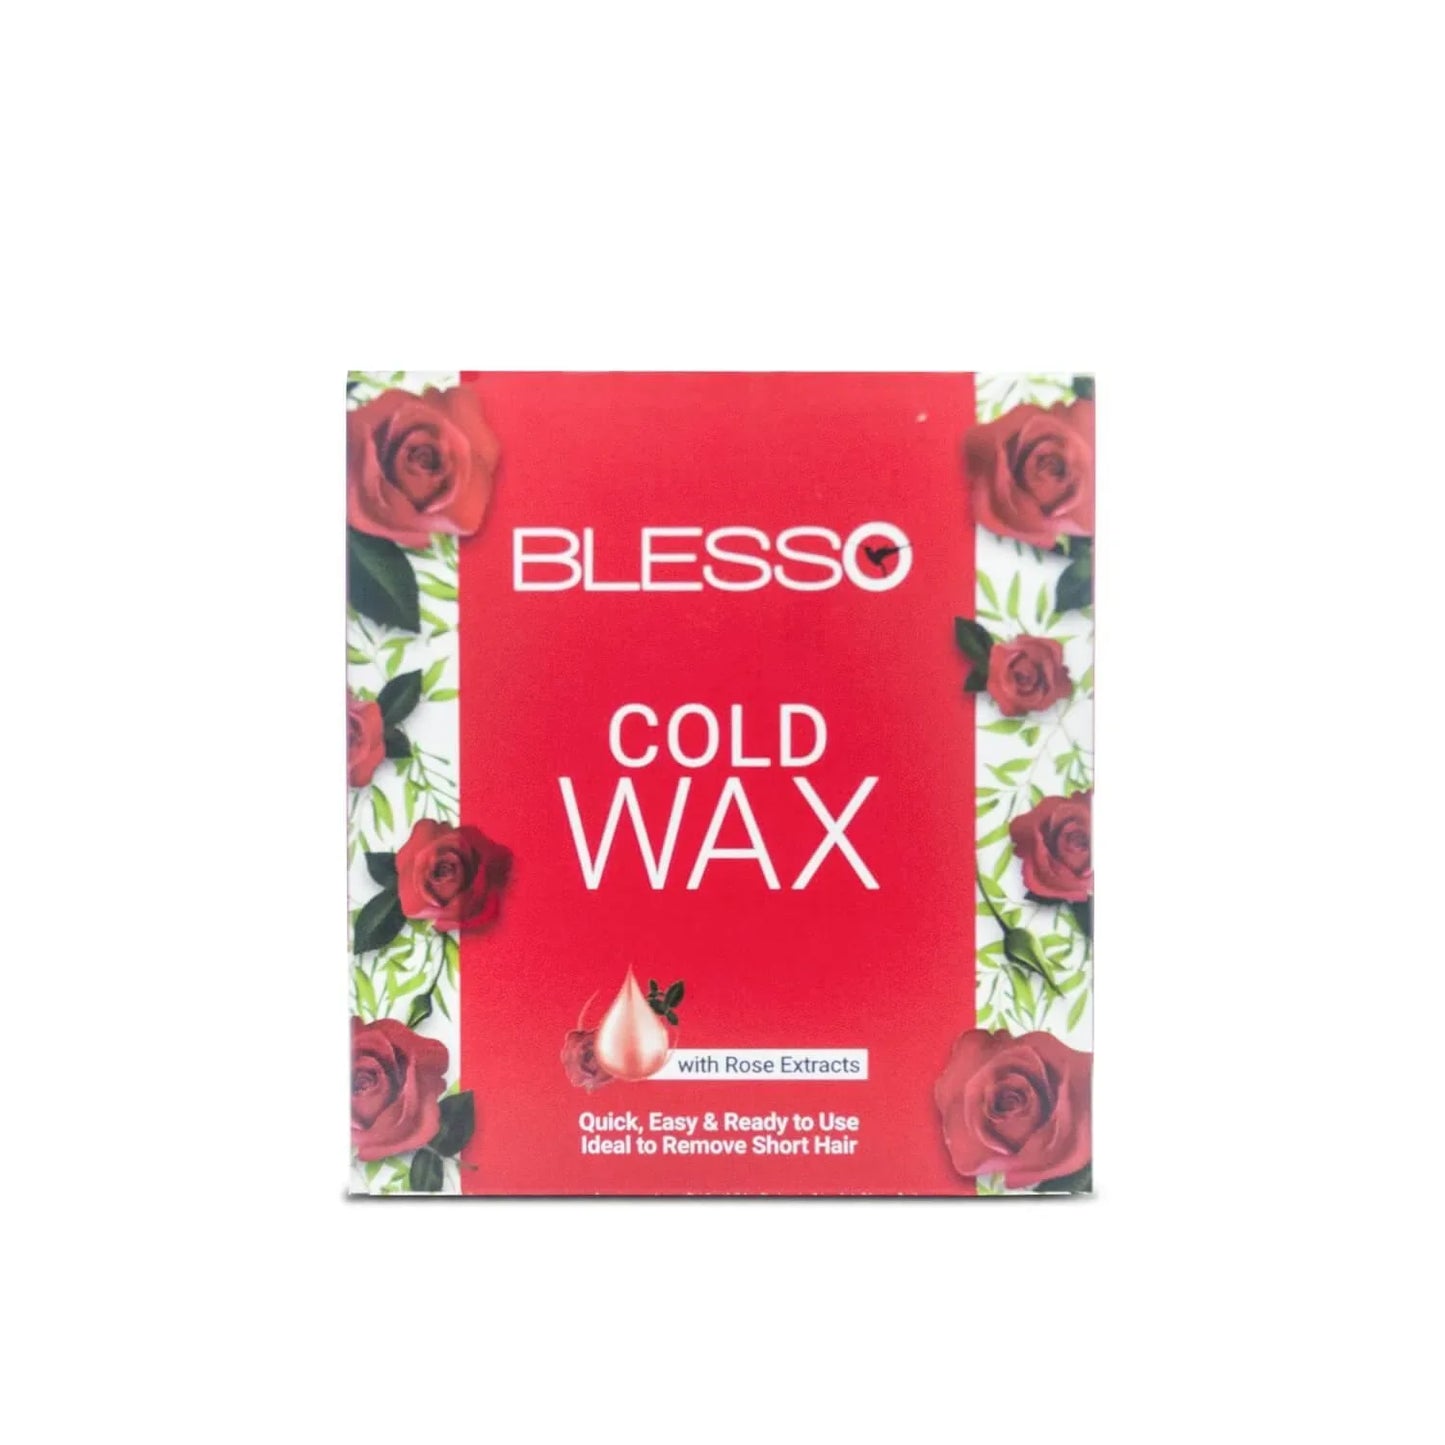 Blesso Cold Max Rose Extracts: Revitalize with nature's freshness (125g).